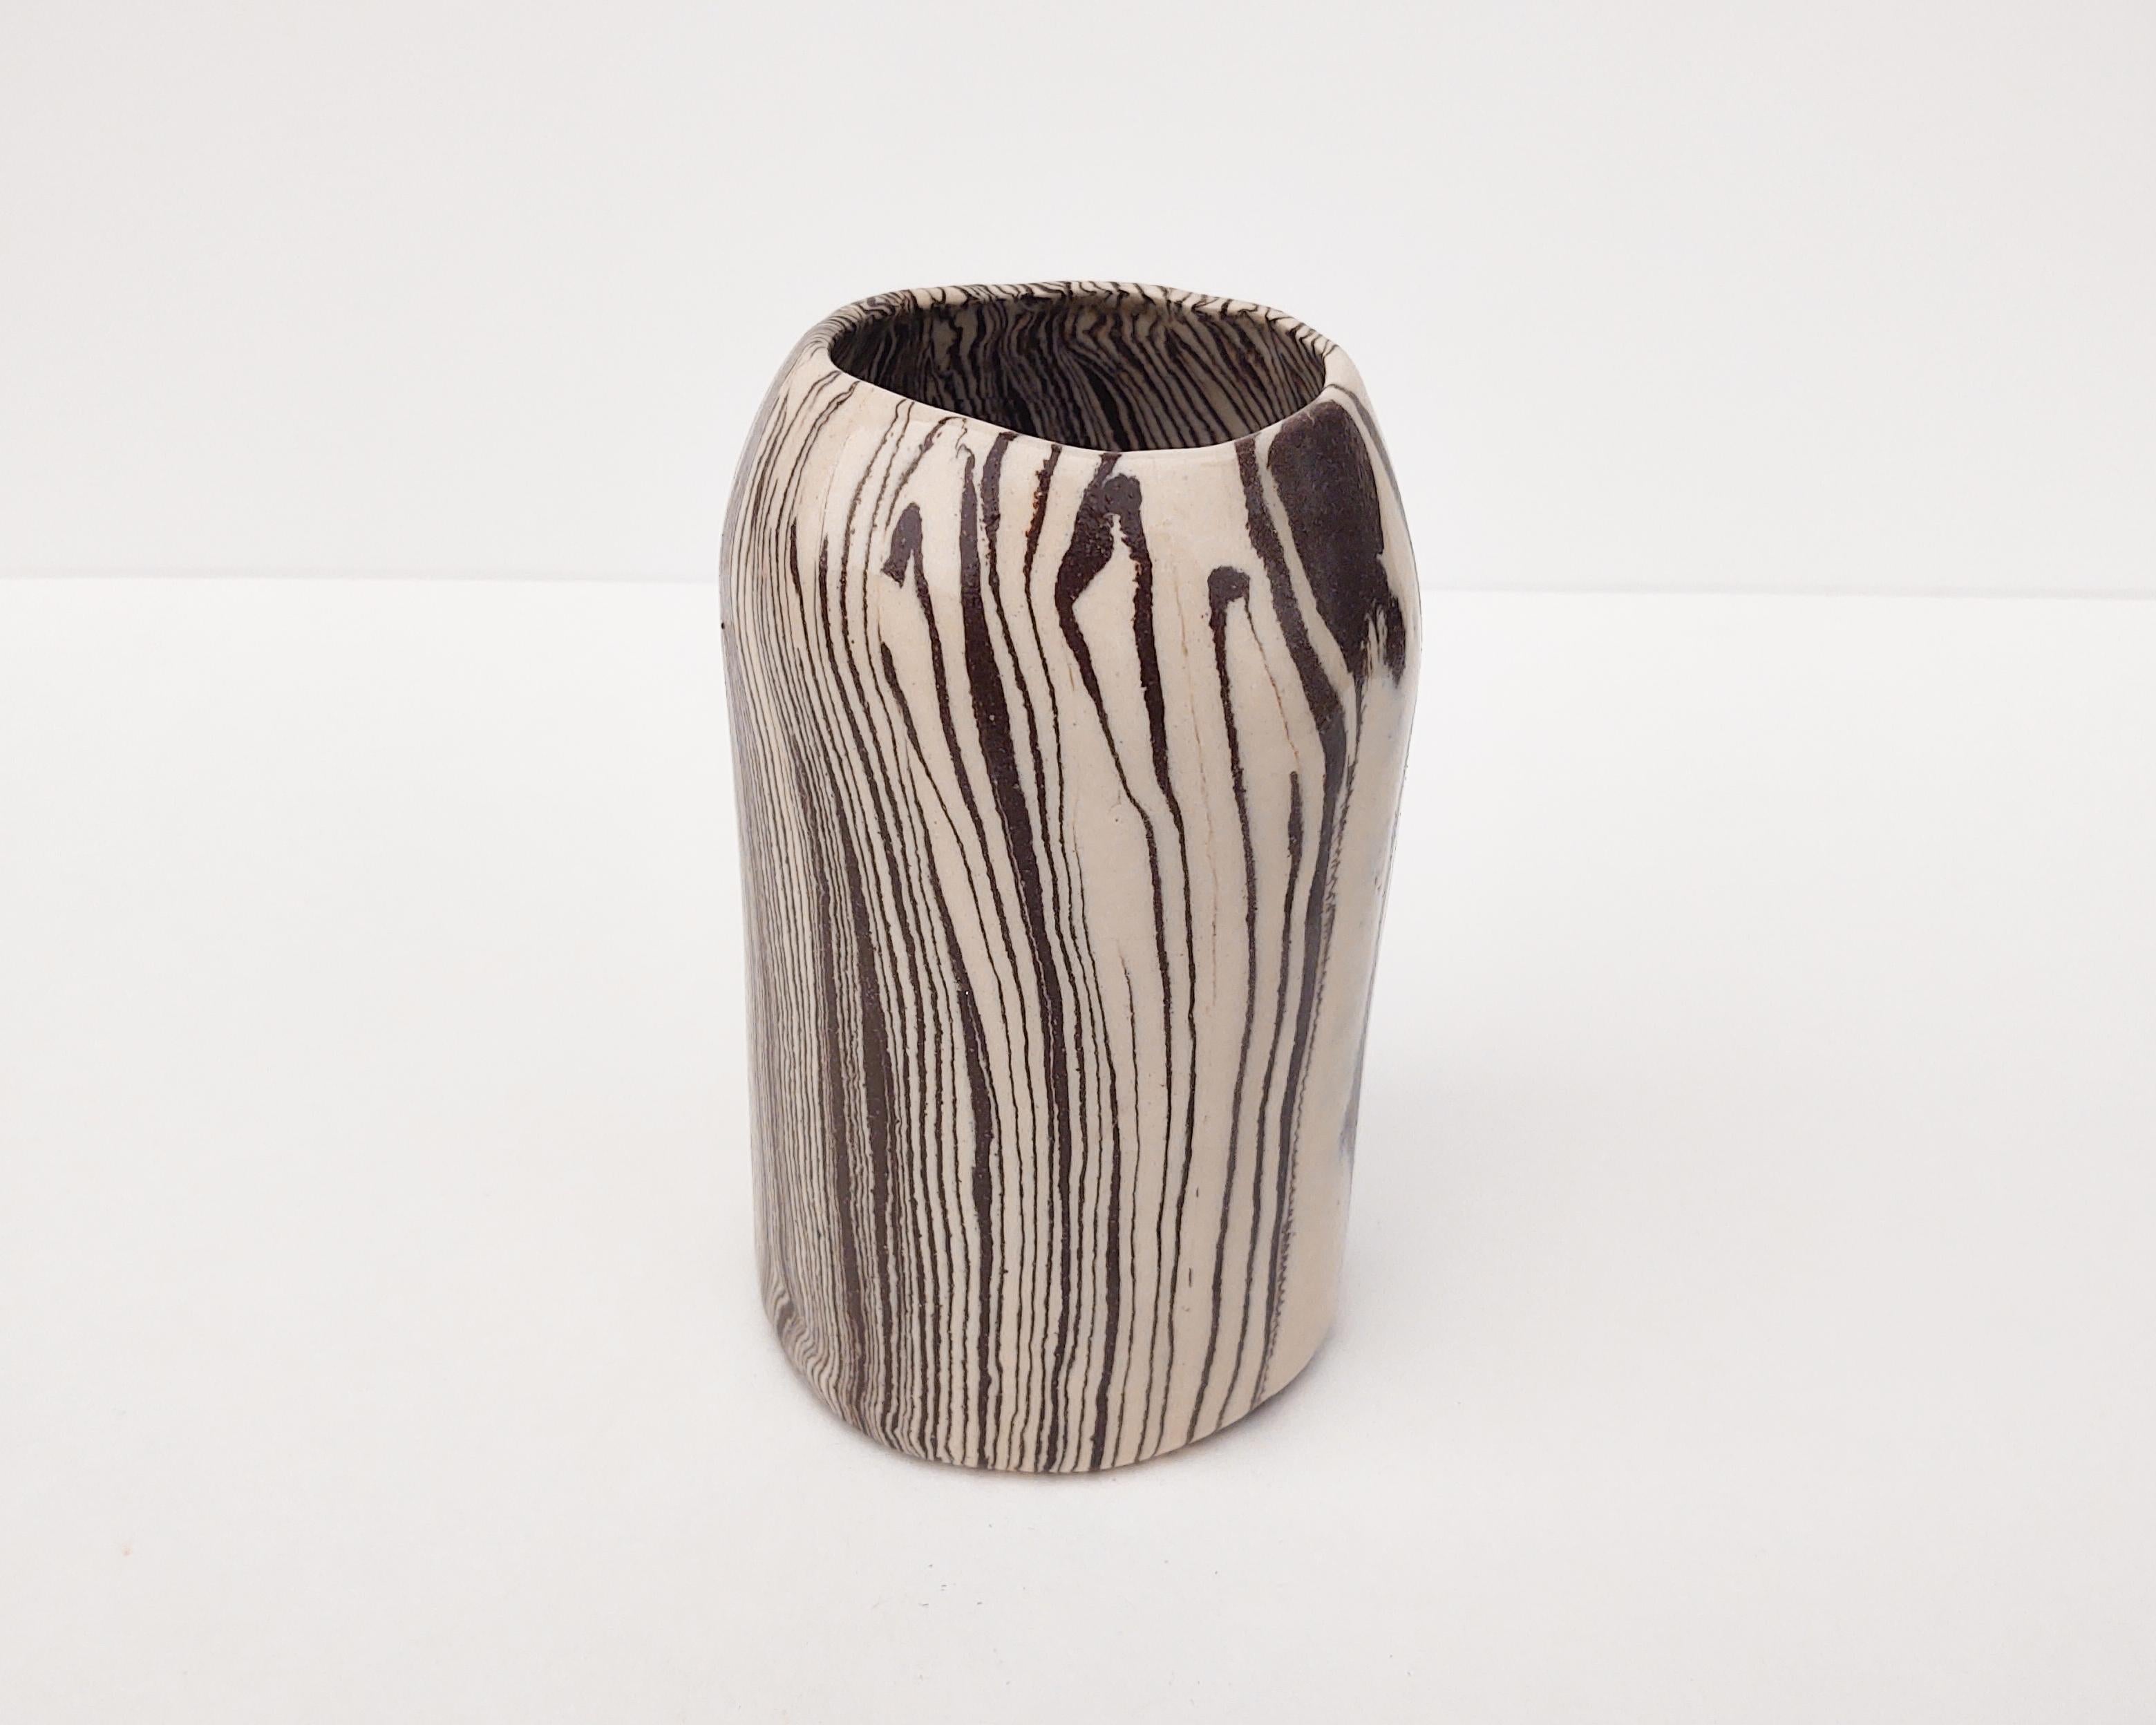 Hand-Crafted Matching Pair of Handmade Nerikomi 'Vanilla Bean' Vases by Fizzy Ceramics For Sale